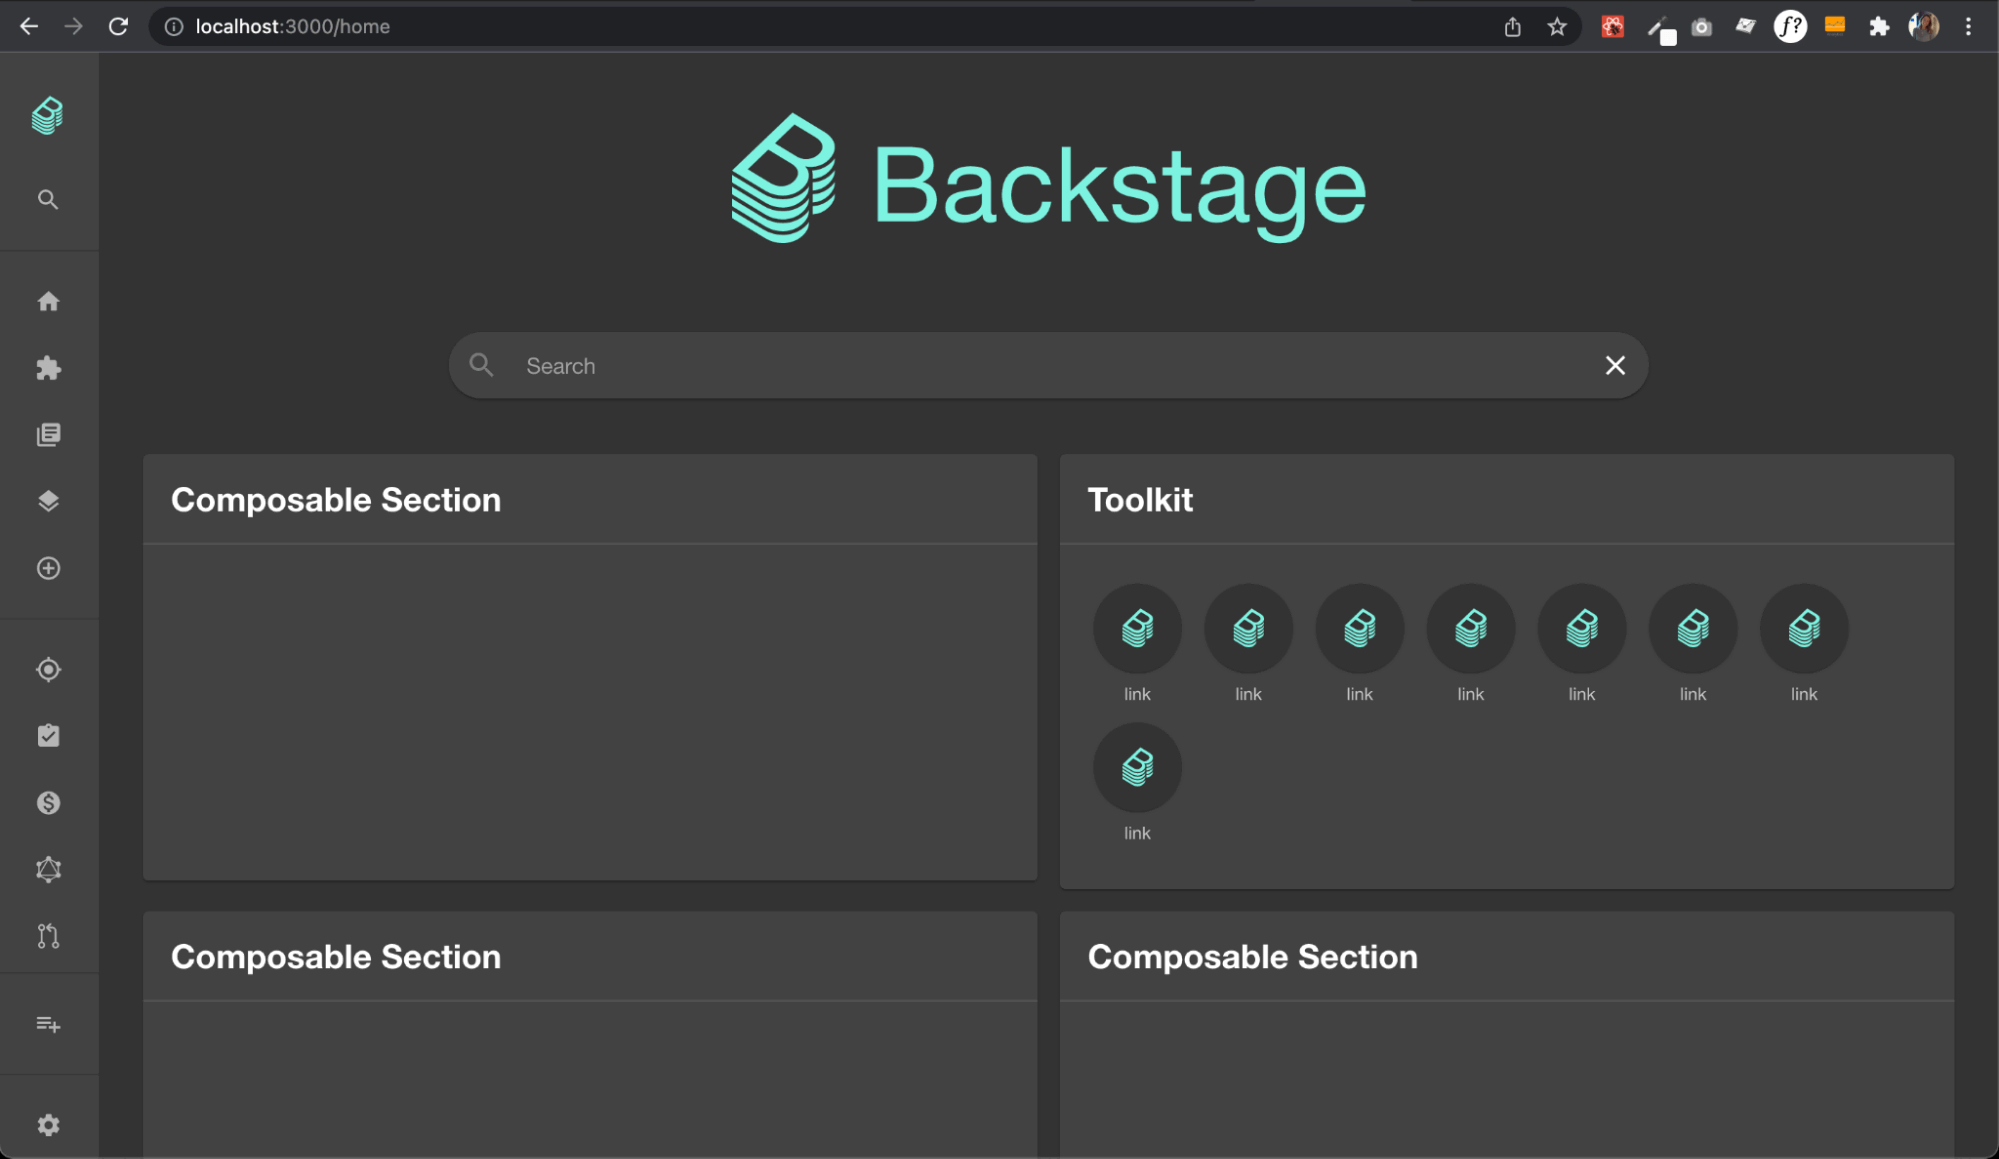 Composed Backstage homepage